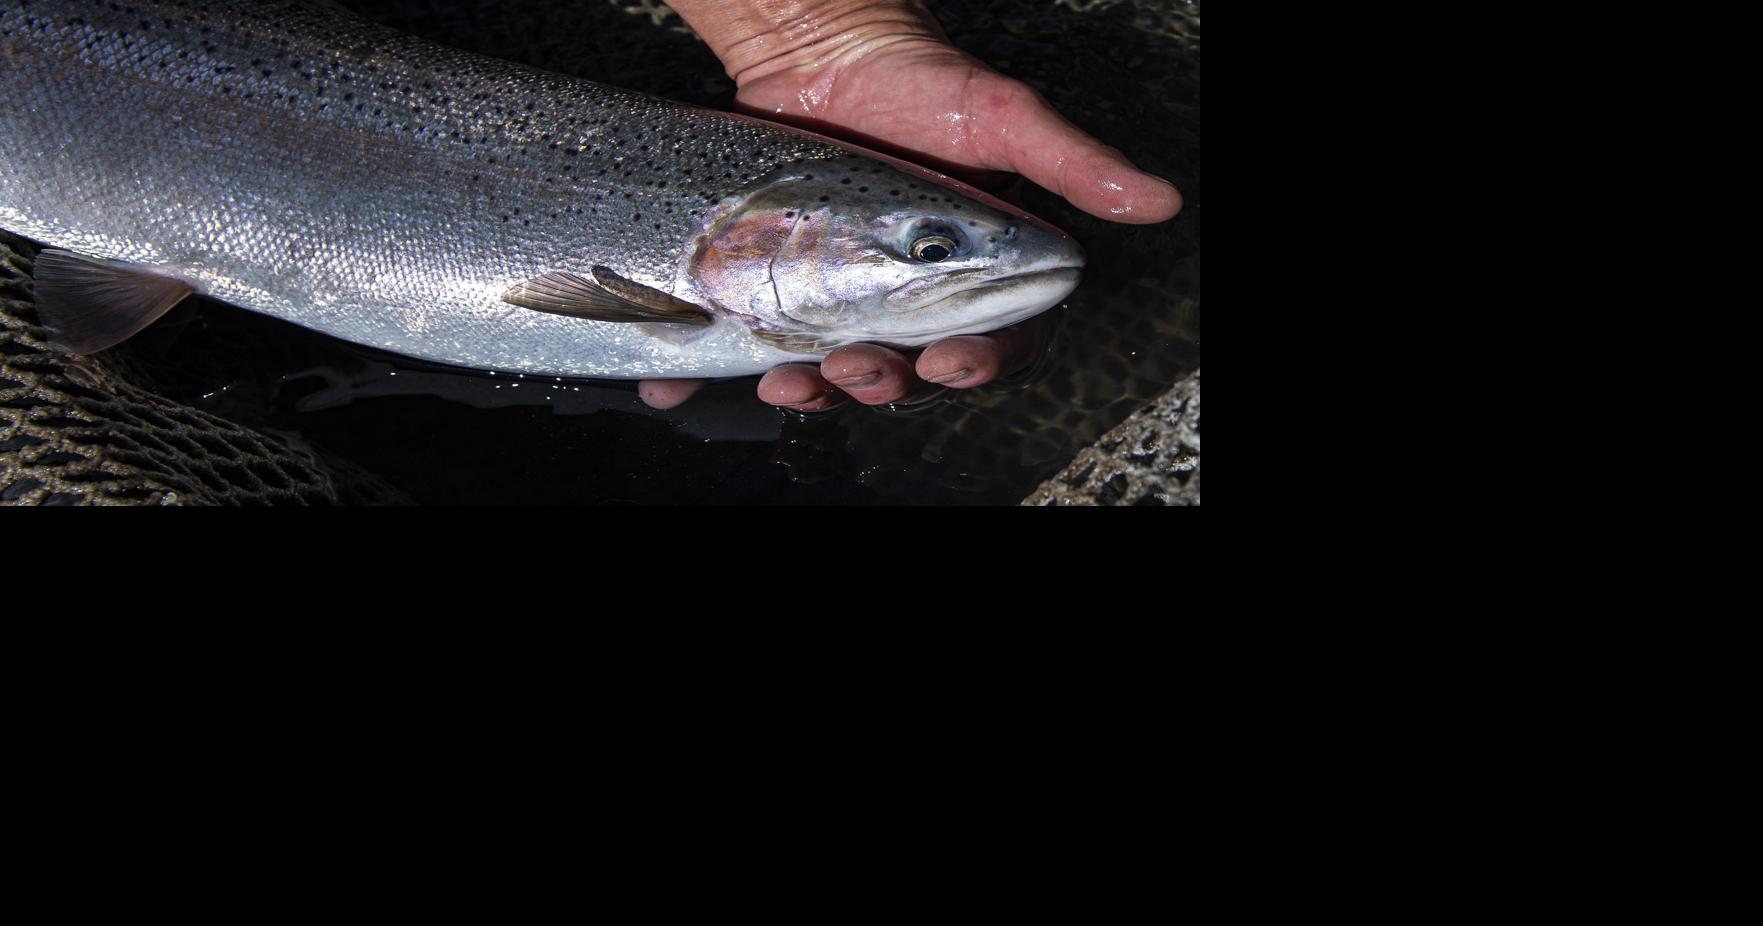 Spring chinook salmon fishing on Columbia River to open for 6 days  beginning Friday